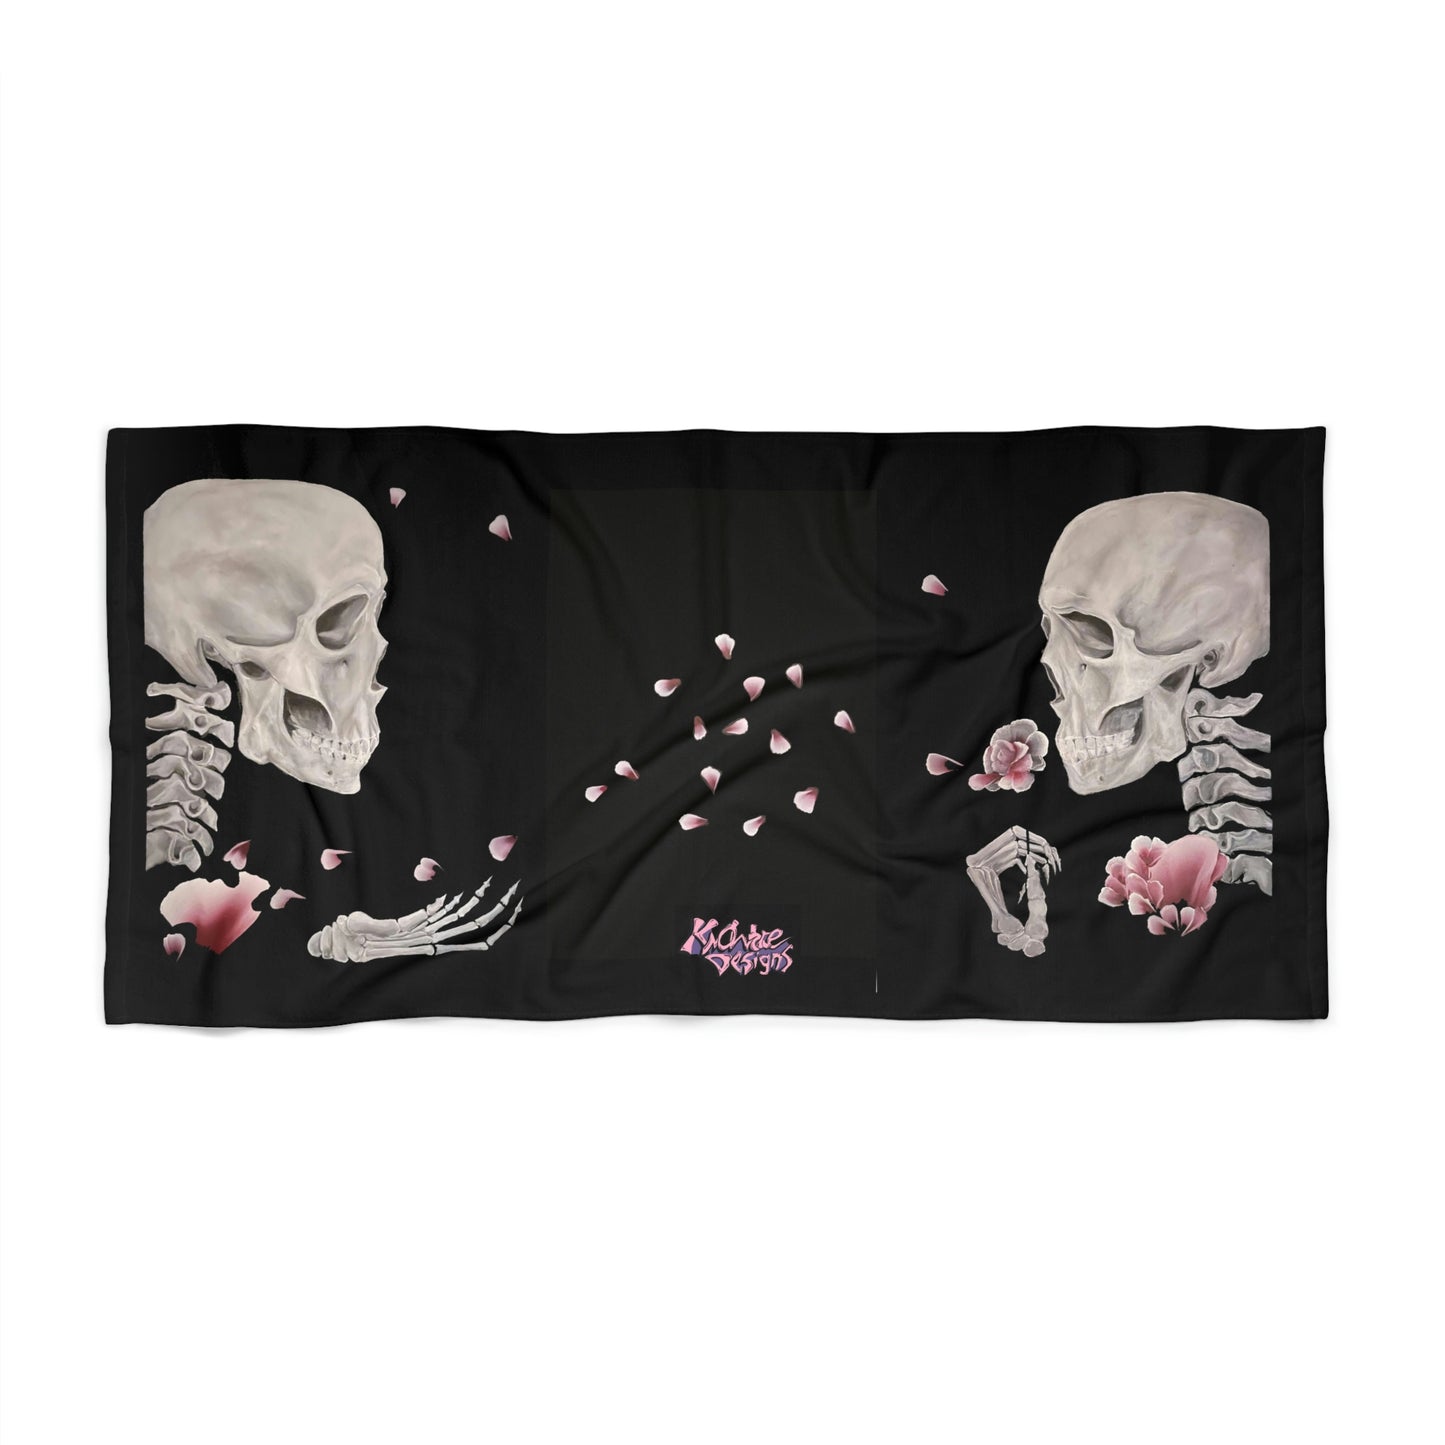 Skull Beach Towel Give and Receive